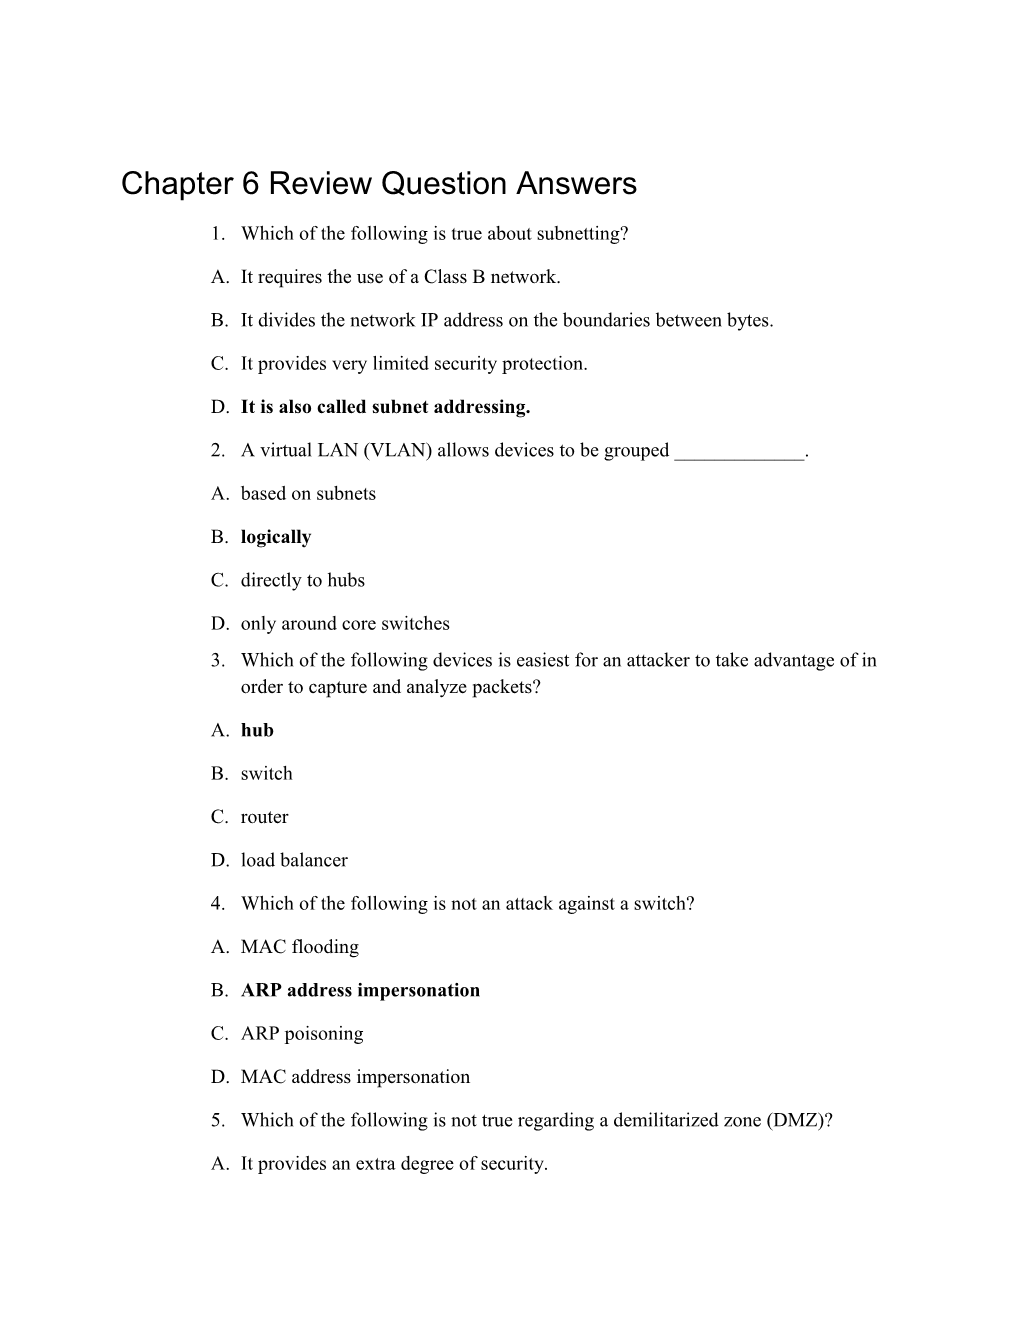 Chapter 6 Review Question Answers